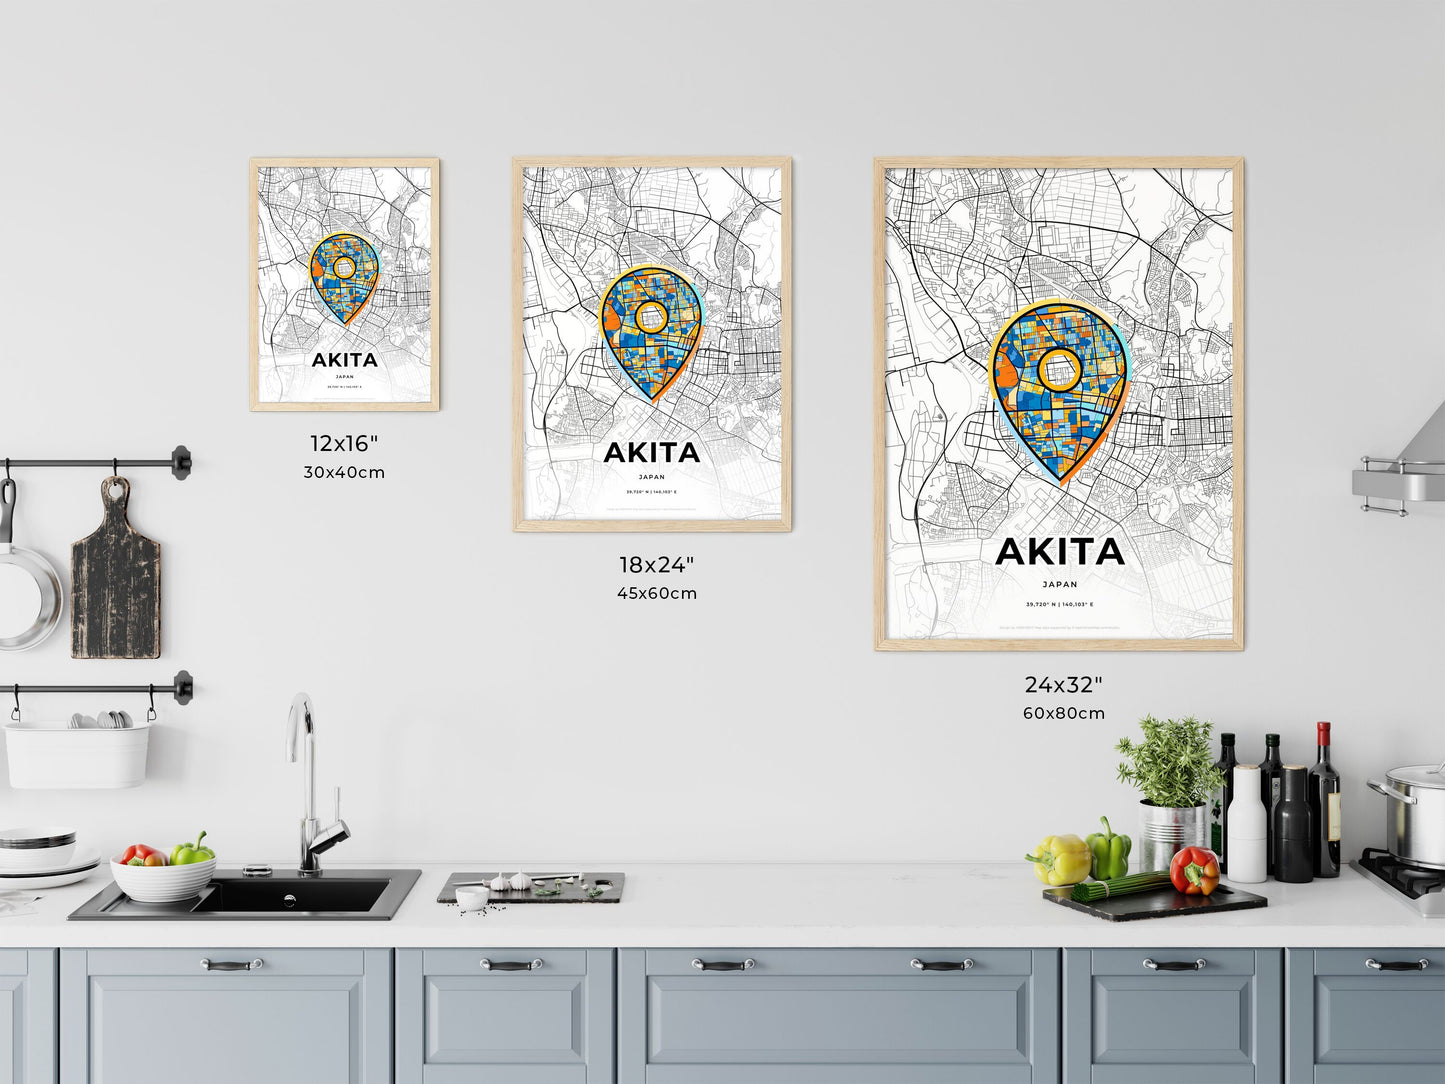 AKITA JAPAN minimal art map with a colorful icon. Where it all began, Couple map gift.